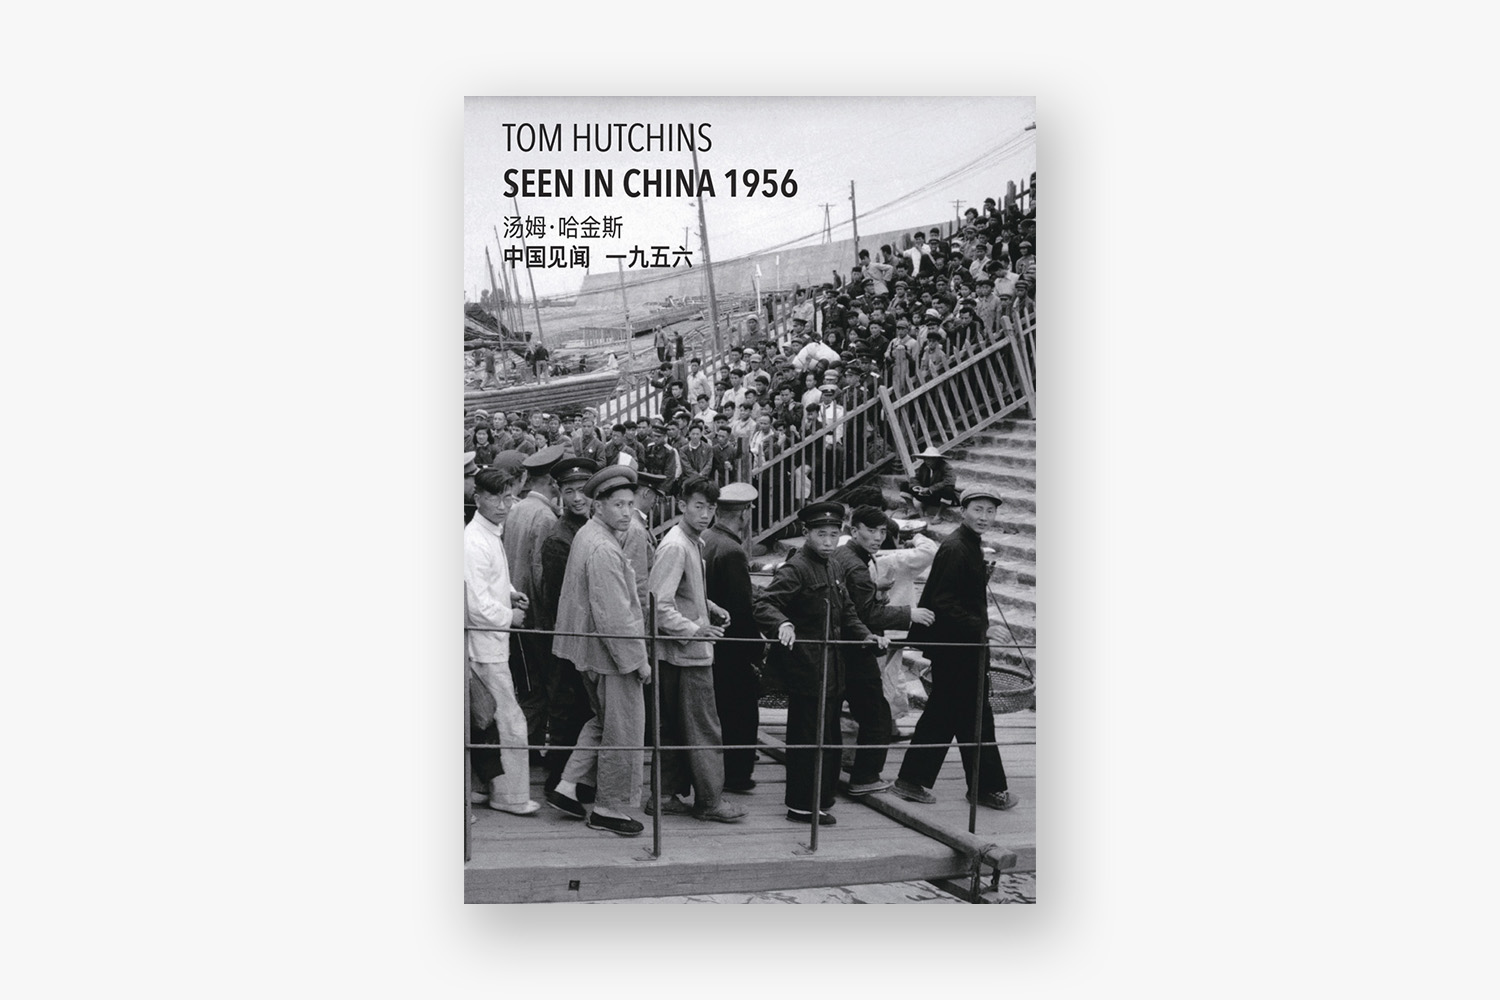 tom hutchins seen in china 1956 book photography of china cover - Tom Hutchins: Seen in China 1956 |  - Tom Hutchins: Seen in China 1956